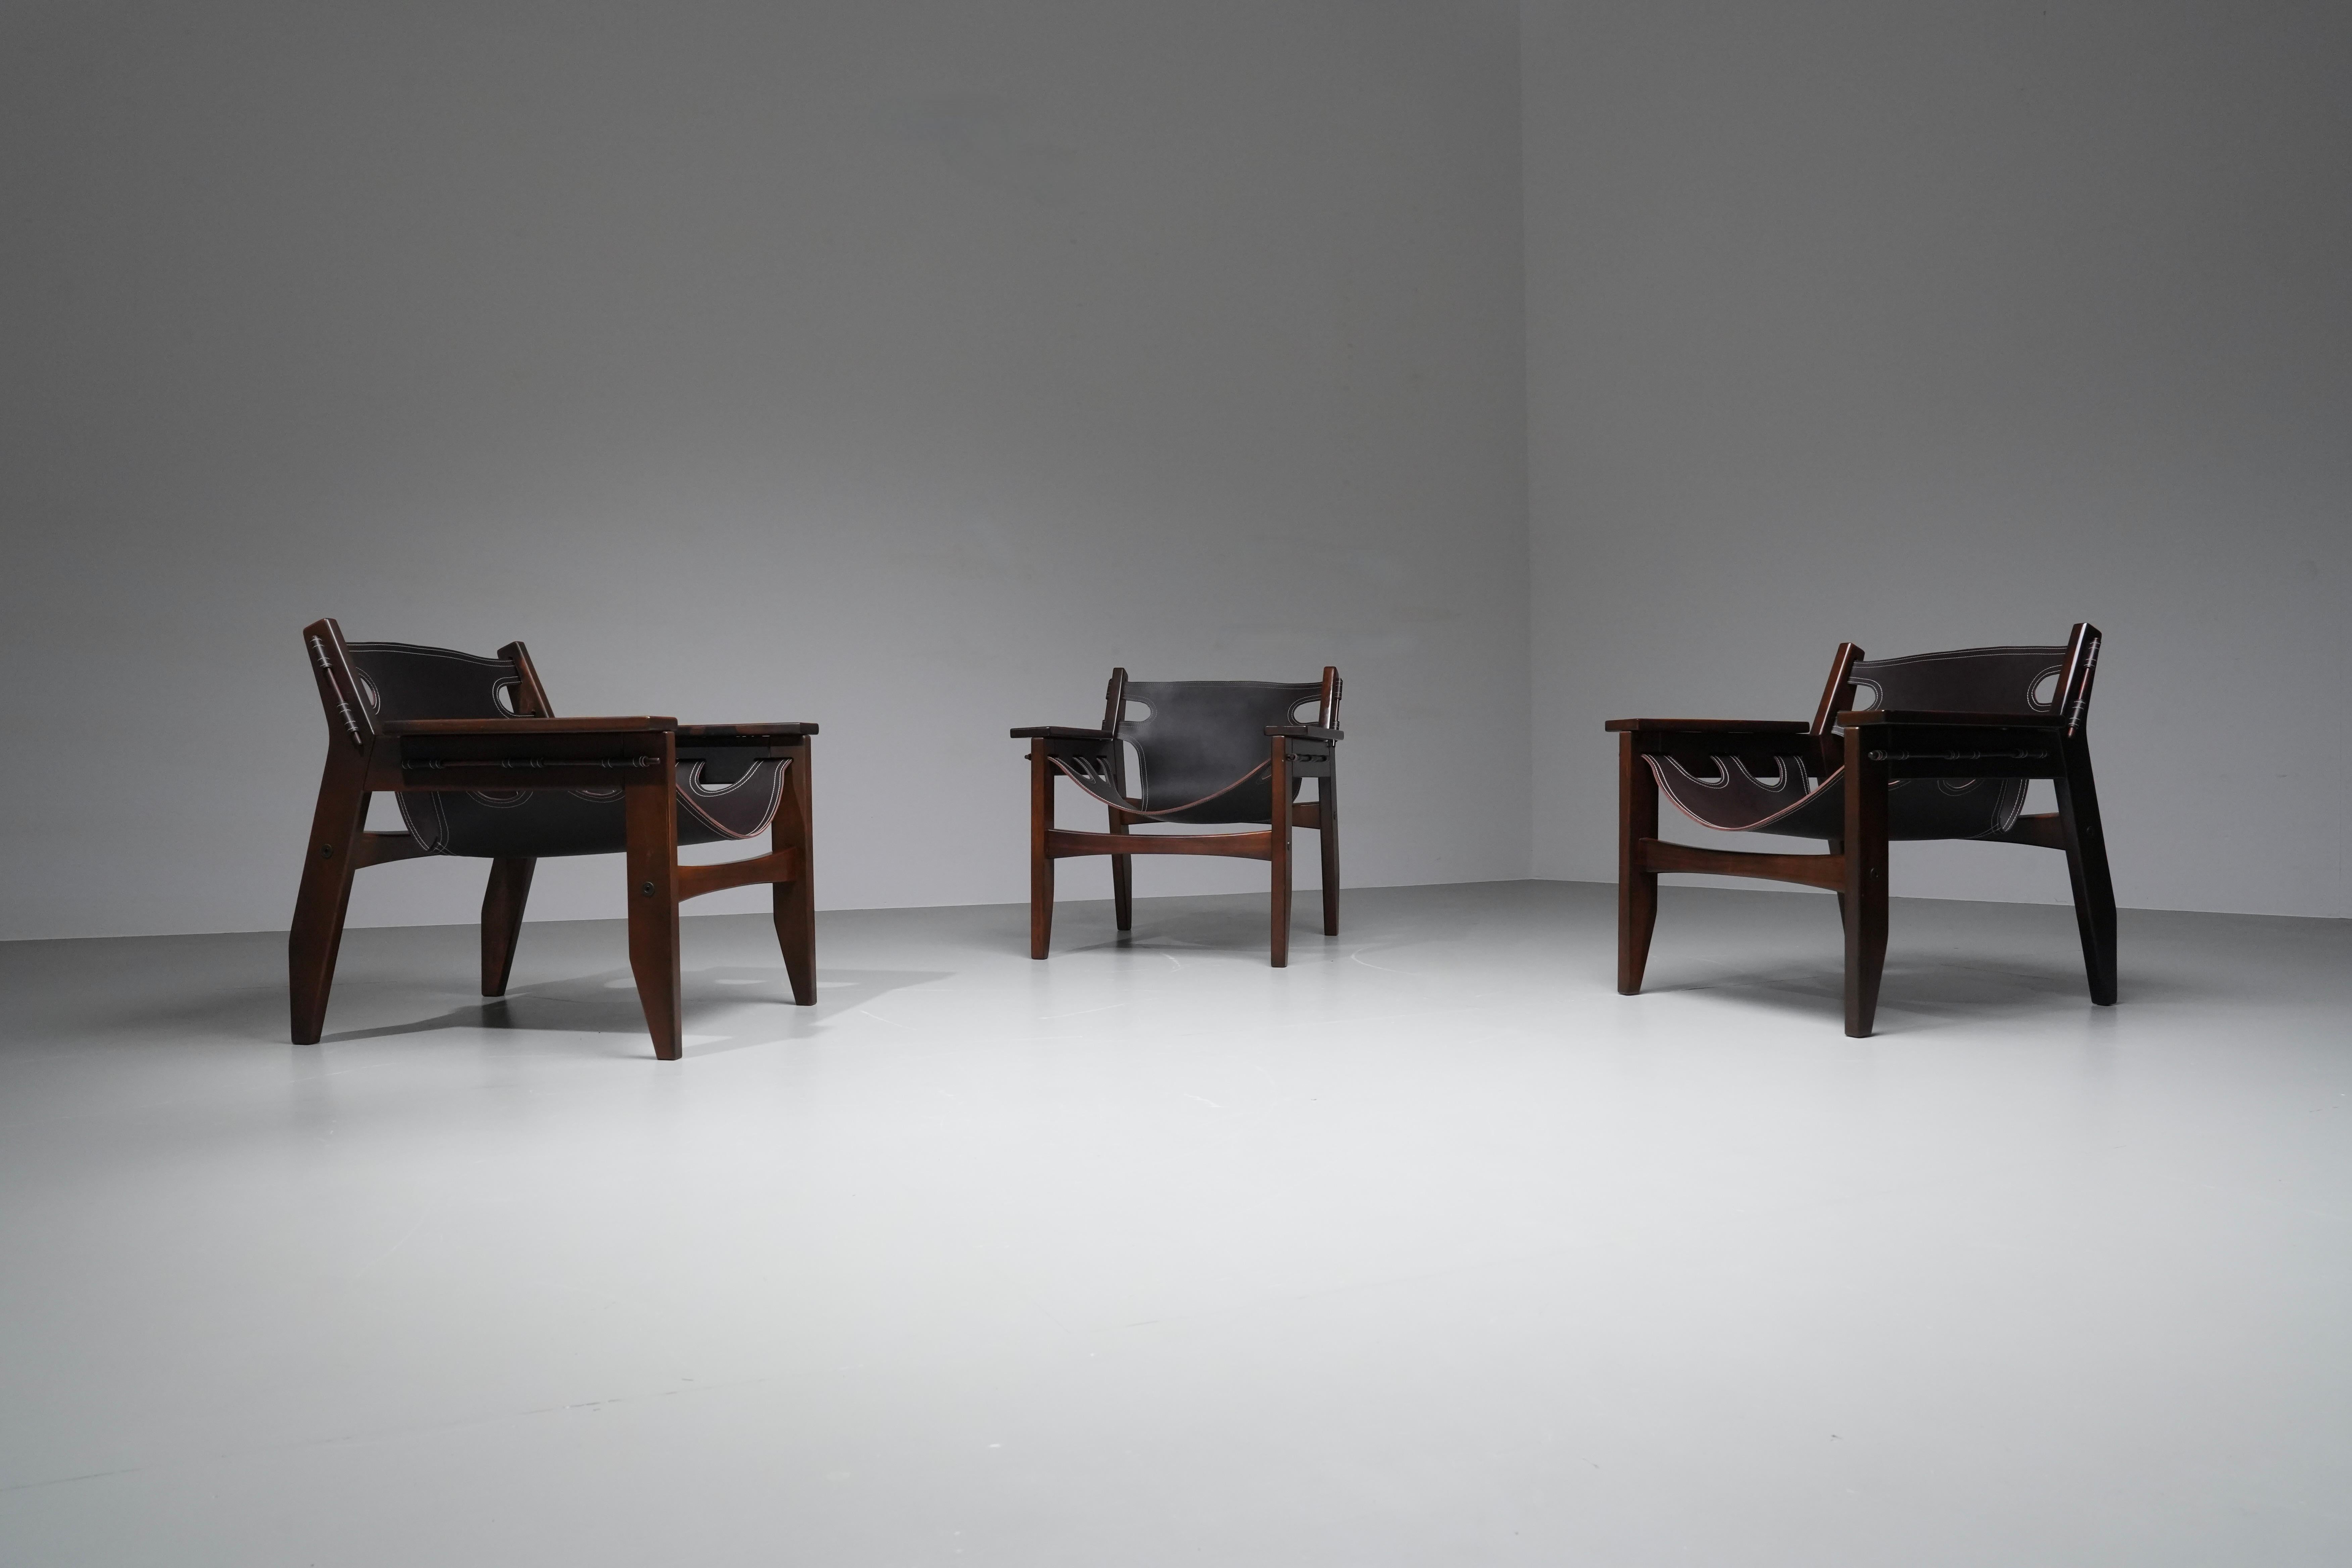 Exceptional set of Kilin chairs by Brazilian architect Sergio Rodrigues. Made out of high density wood and high quality saddle leather these chairs have become truly iconic over the years. The open spaces in the dark brown leather give these chairs